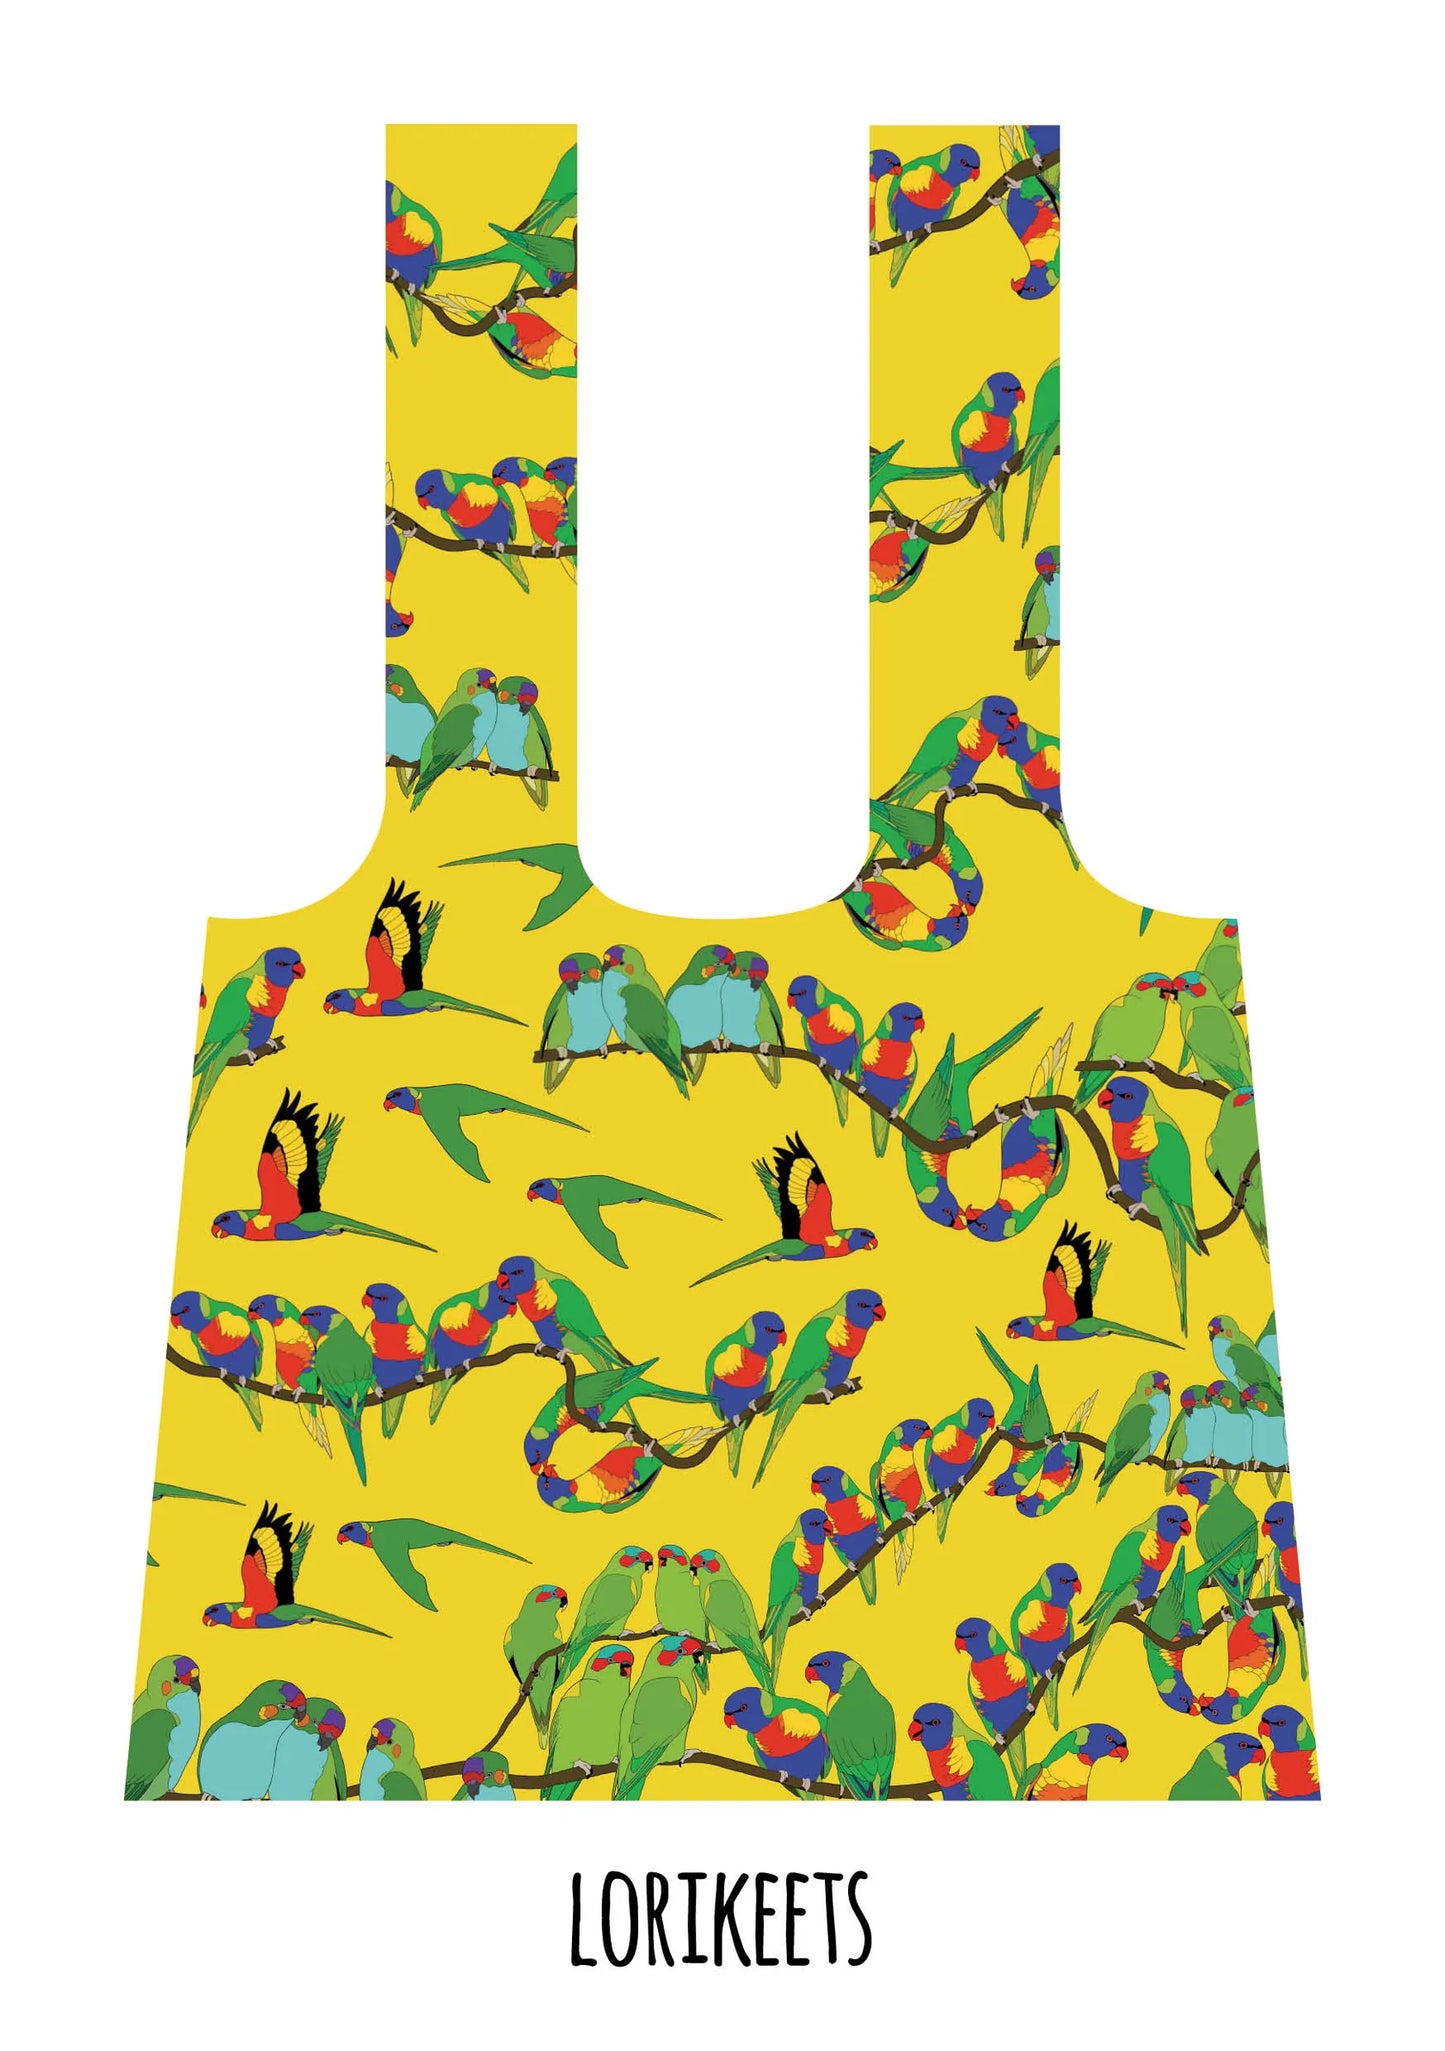 Red Parka Lorikeets Recycled Plastic Folding Shopping Bag